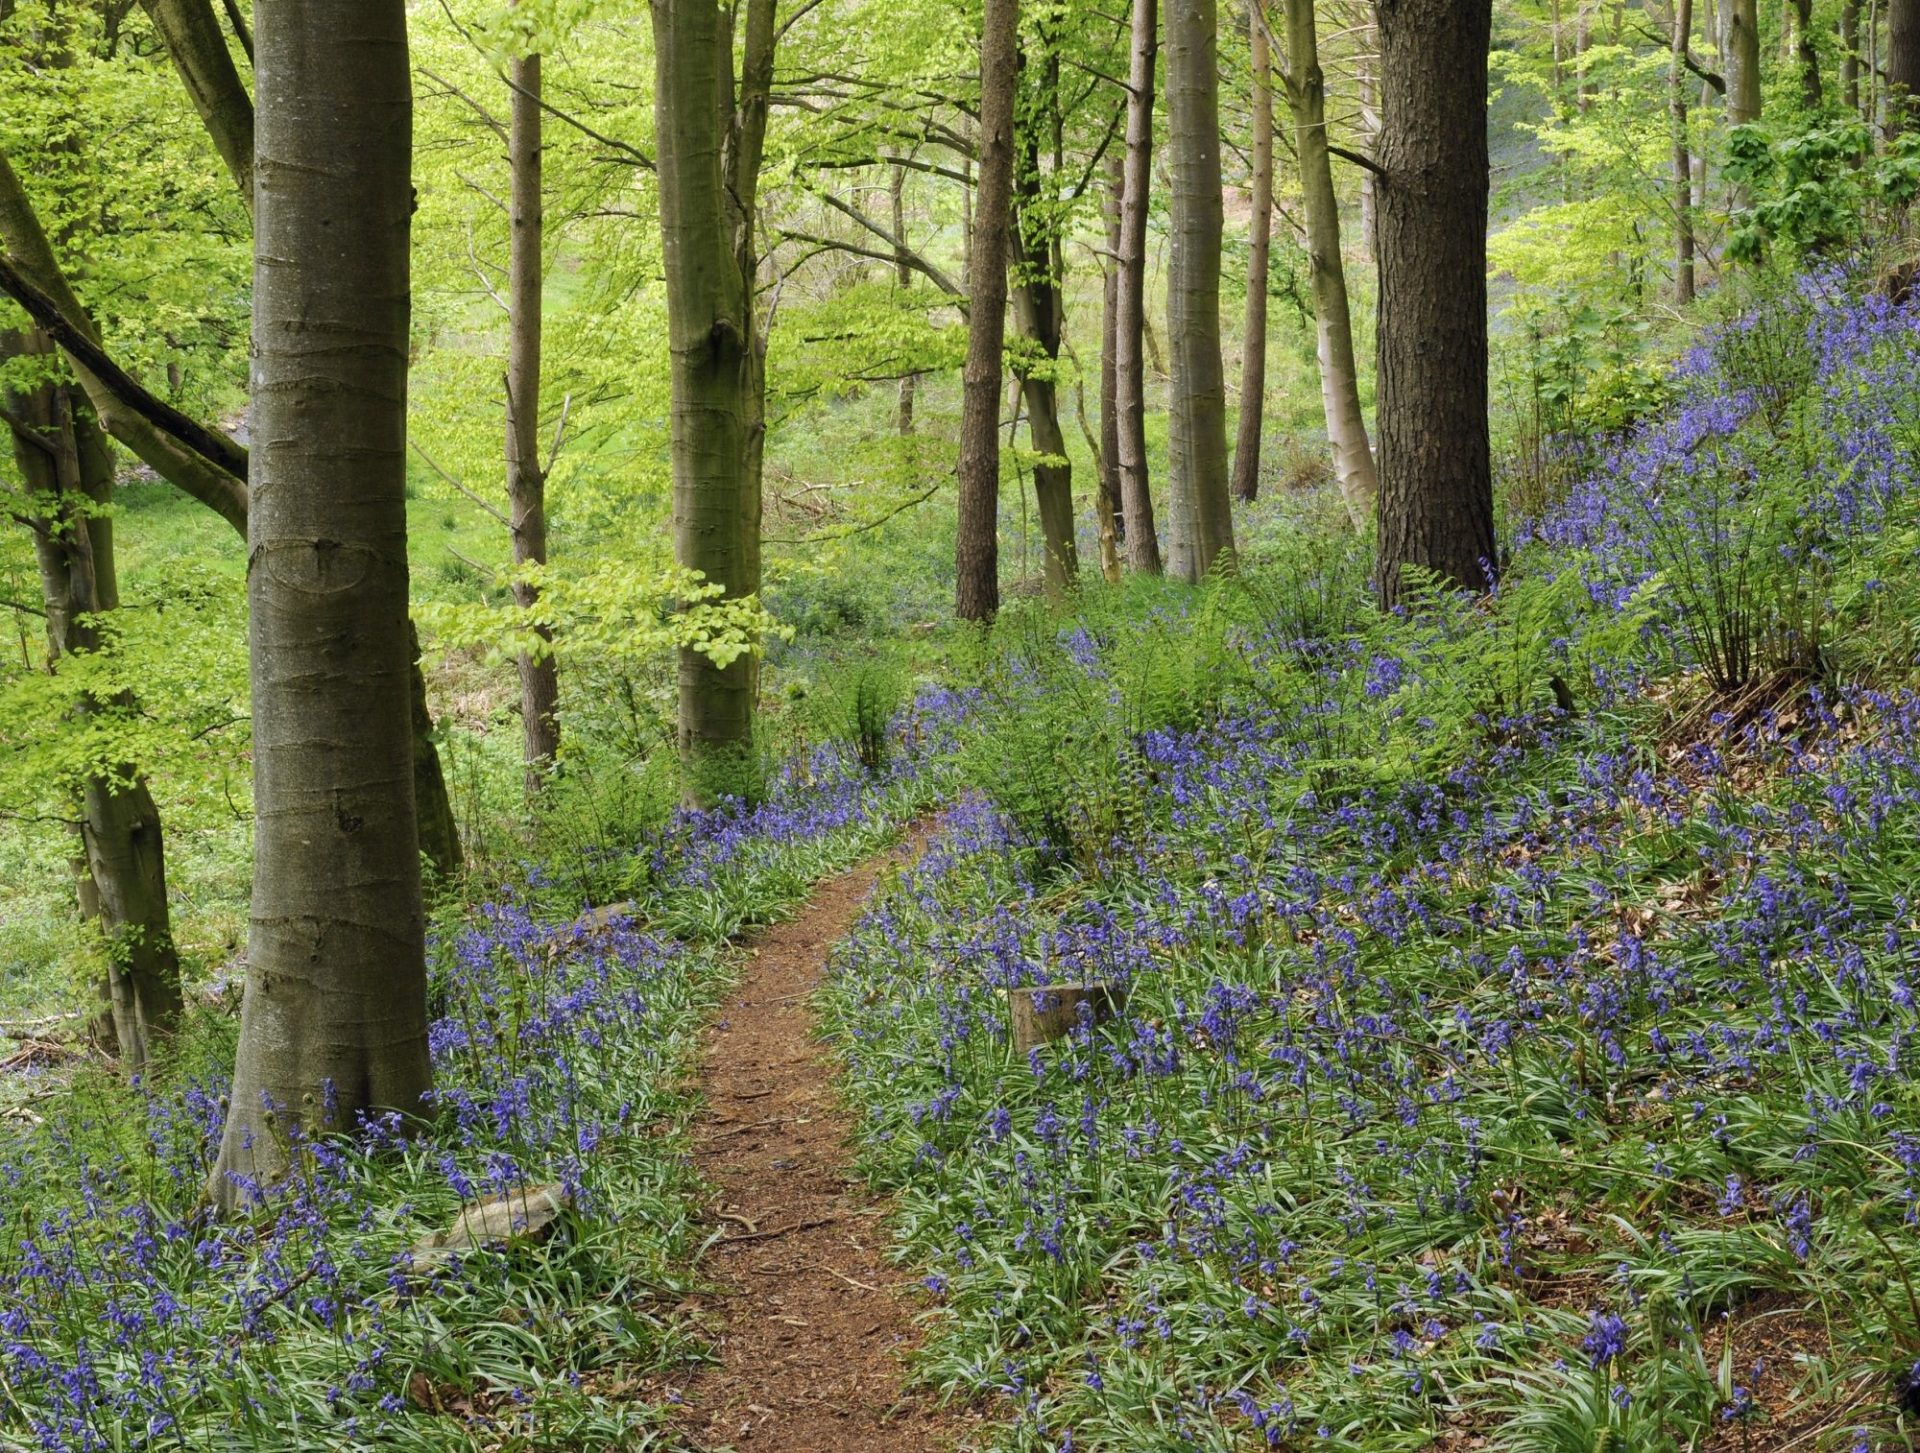 Melmerby Hall bluebell woods private walks for guests at Melmerby Hall Stag Cottage and Kirkbride Hall at The Rowley Estates woodland glen dogs friendly dog welcome holiday cottage